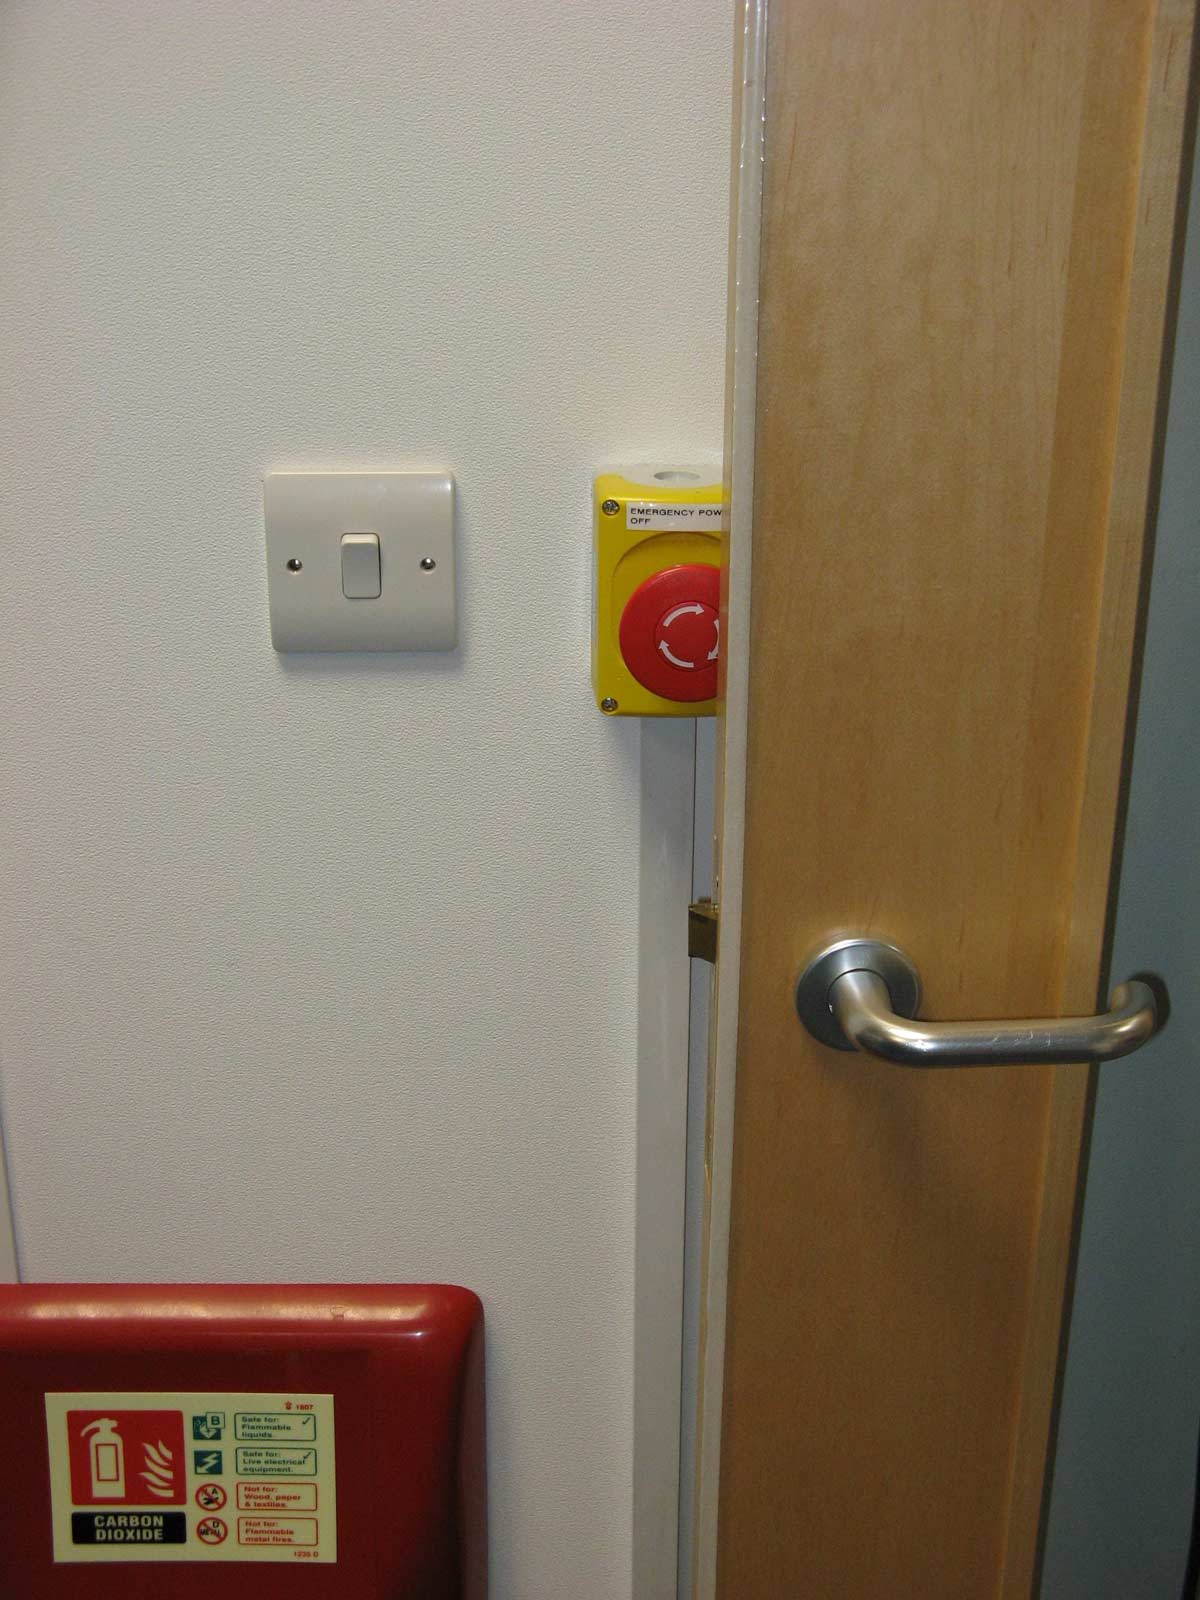 Our electrician installed an emergency power-off button...